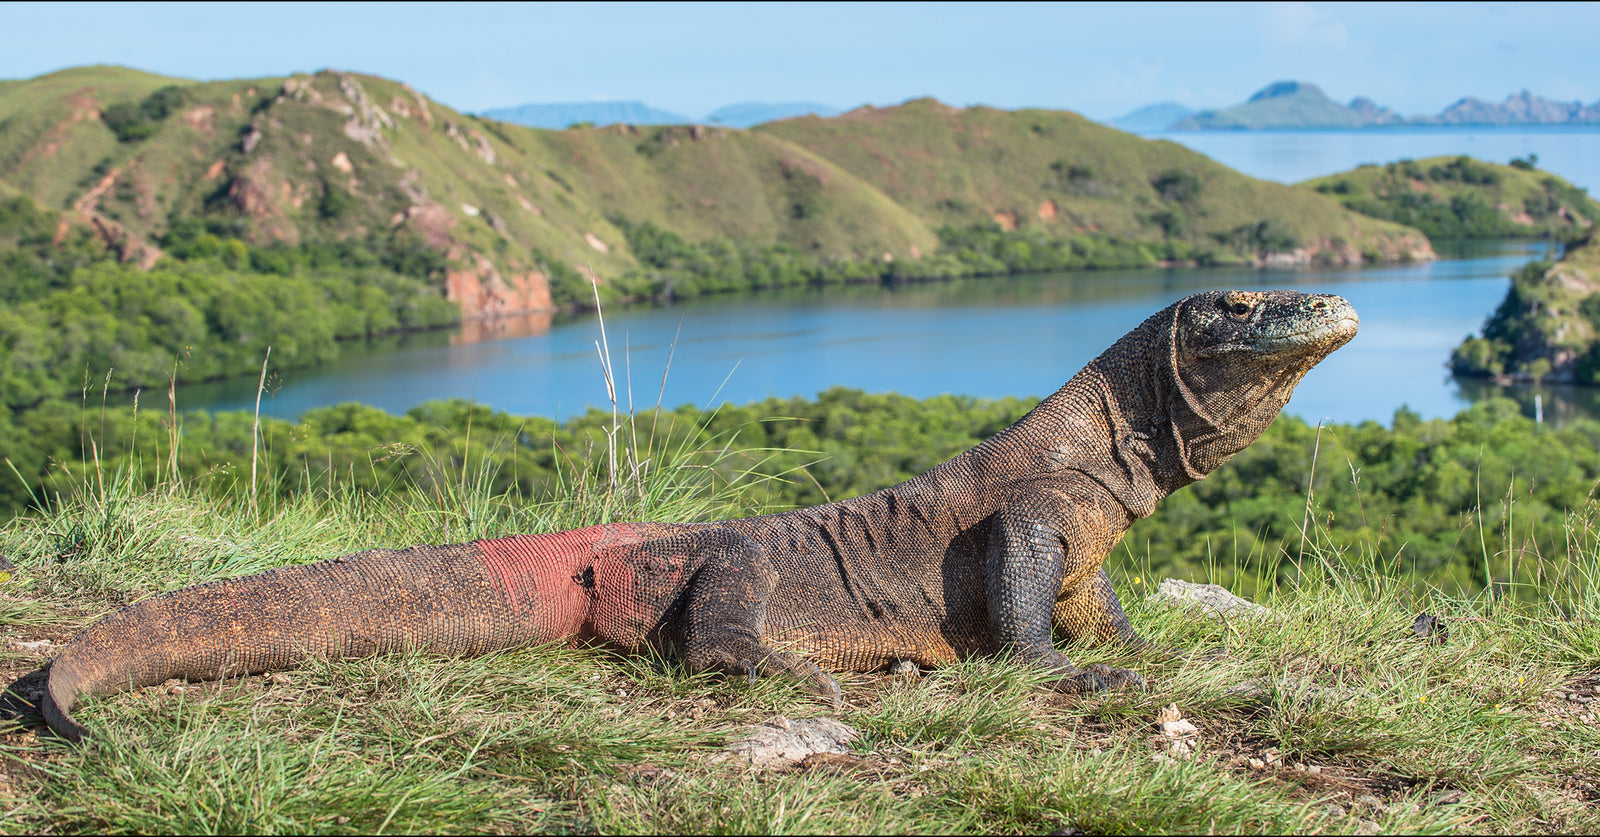 Komodo Dragon in a grass near the water and mountains in Flores, Indonesia.